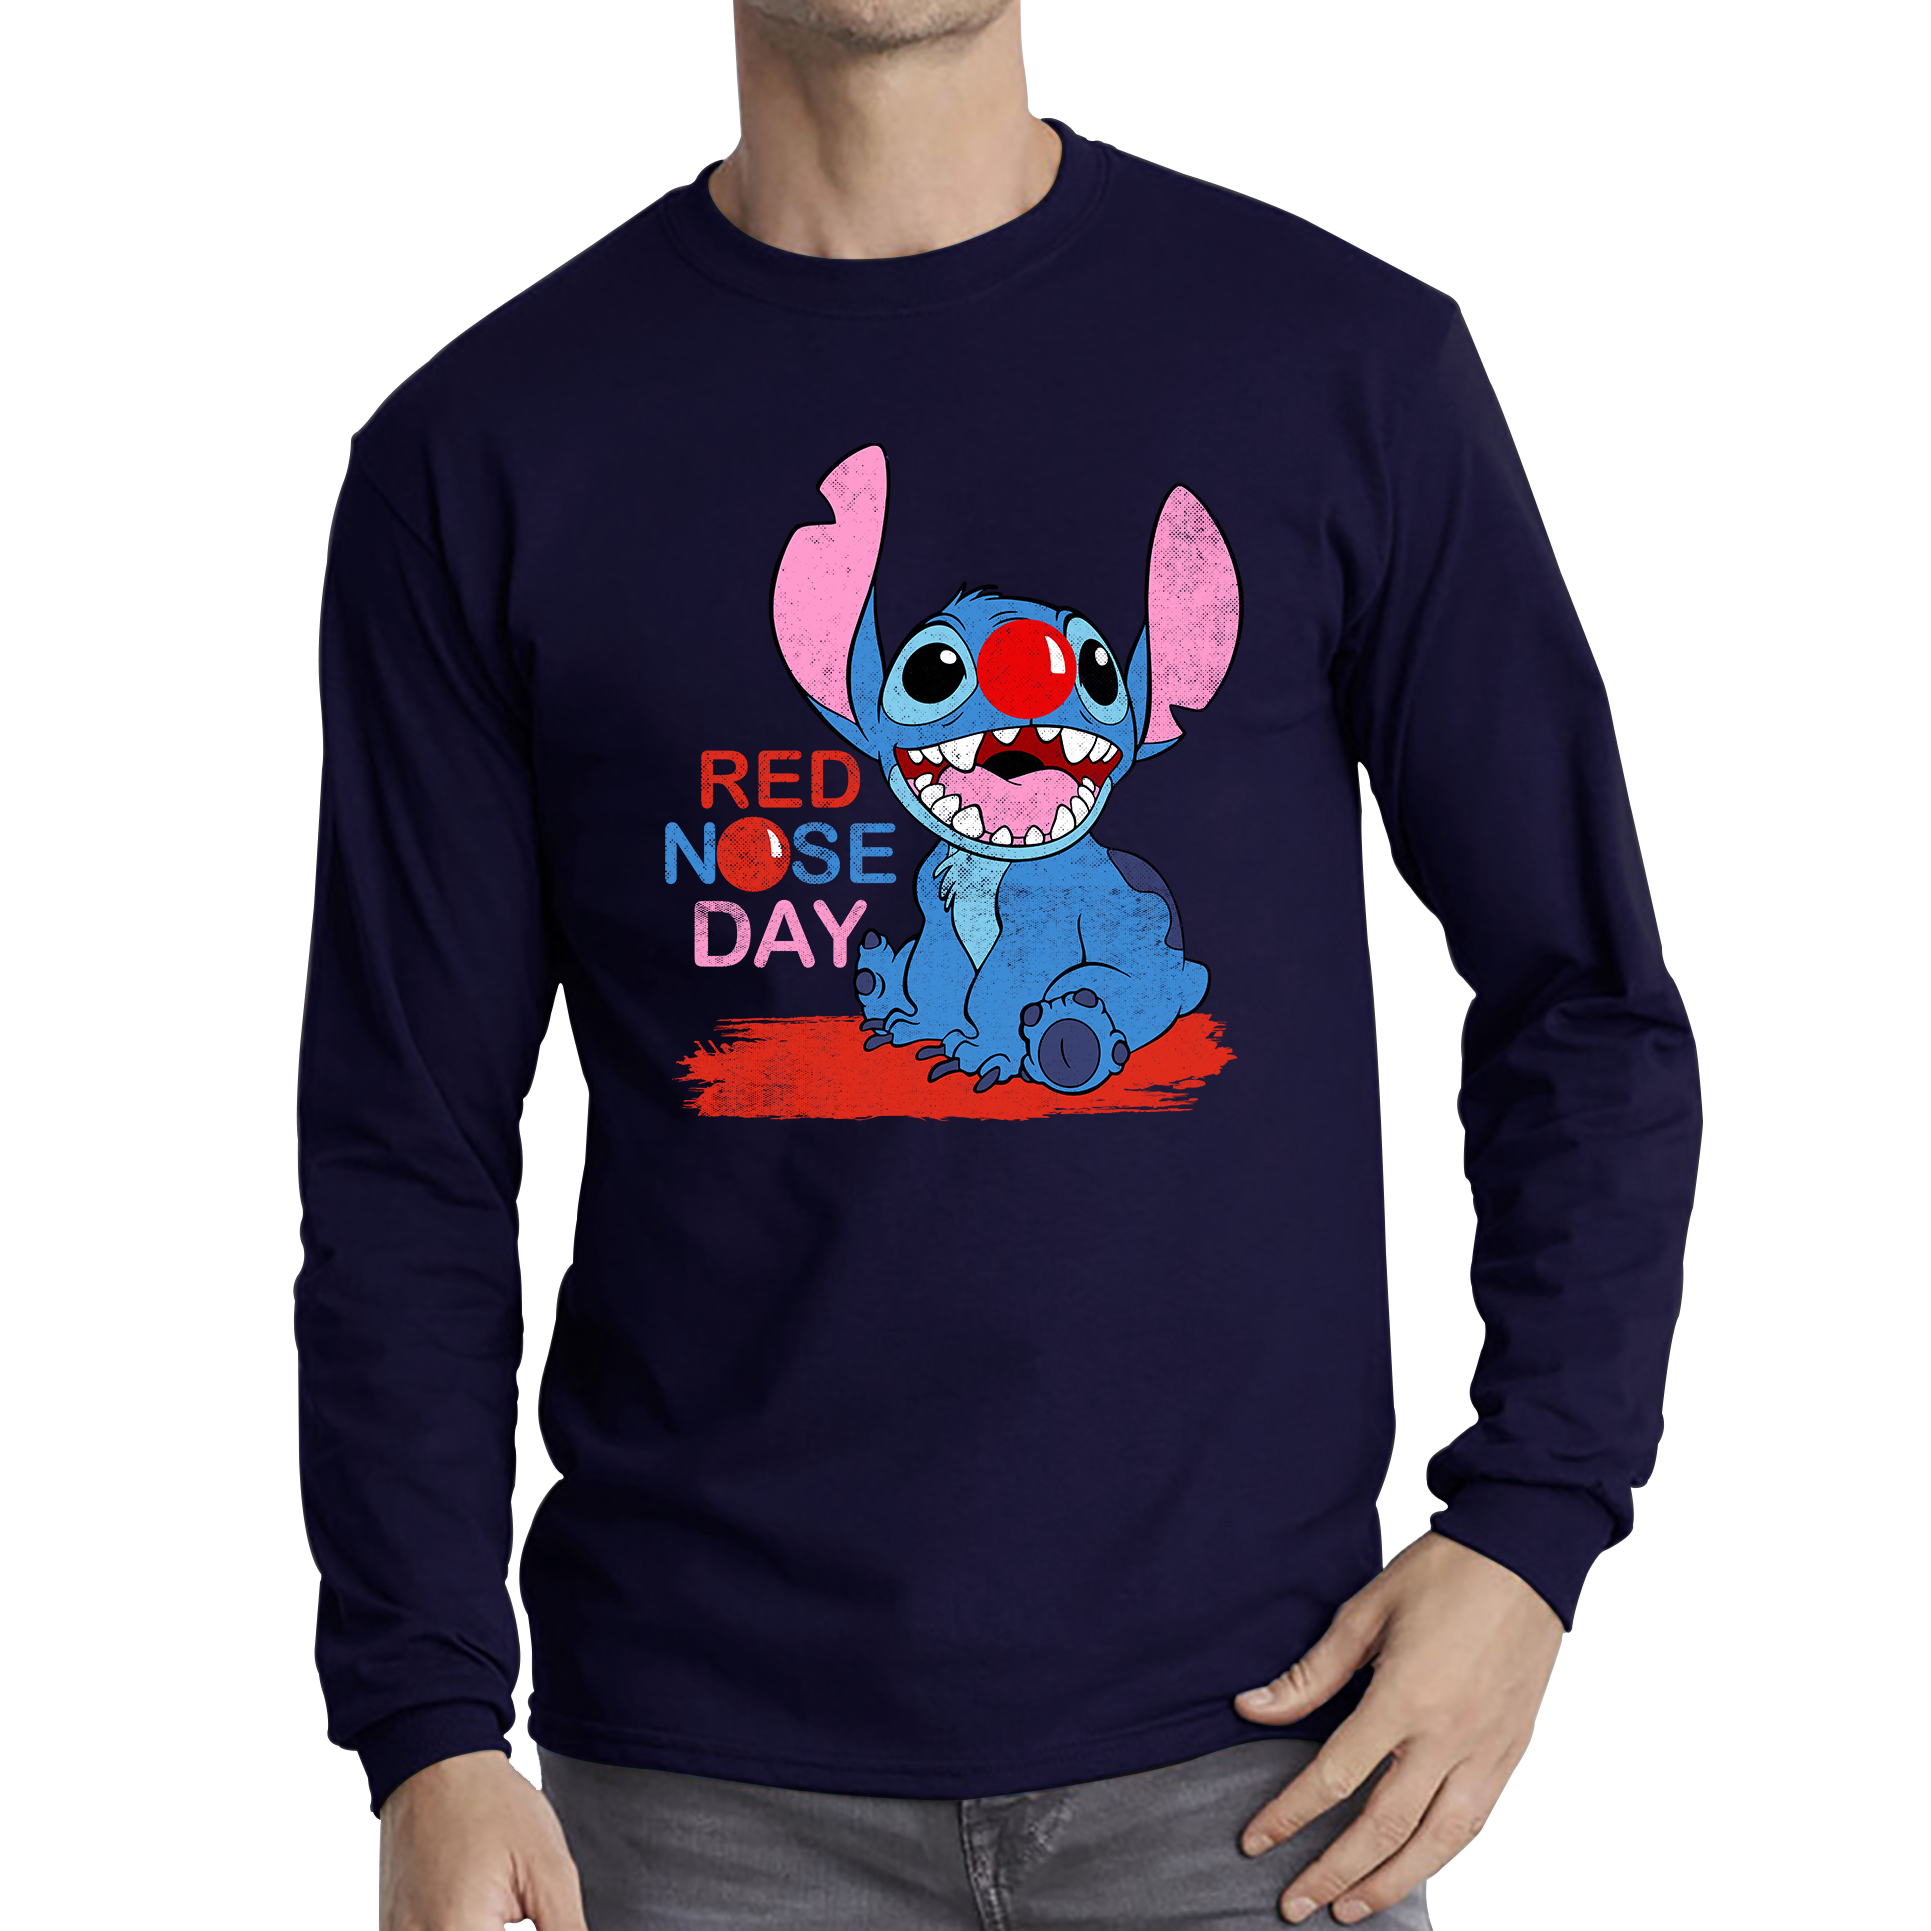 Ohana Disney Stitch Red Nose Day Adult Long Sleeve T Shirt. 50% Goes To Charity